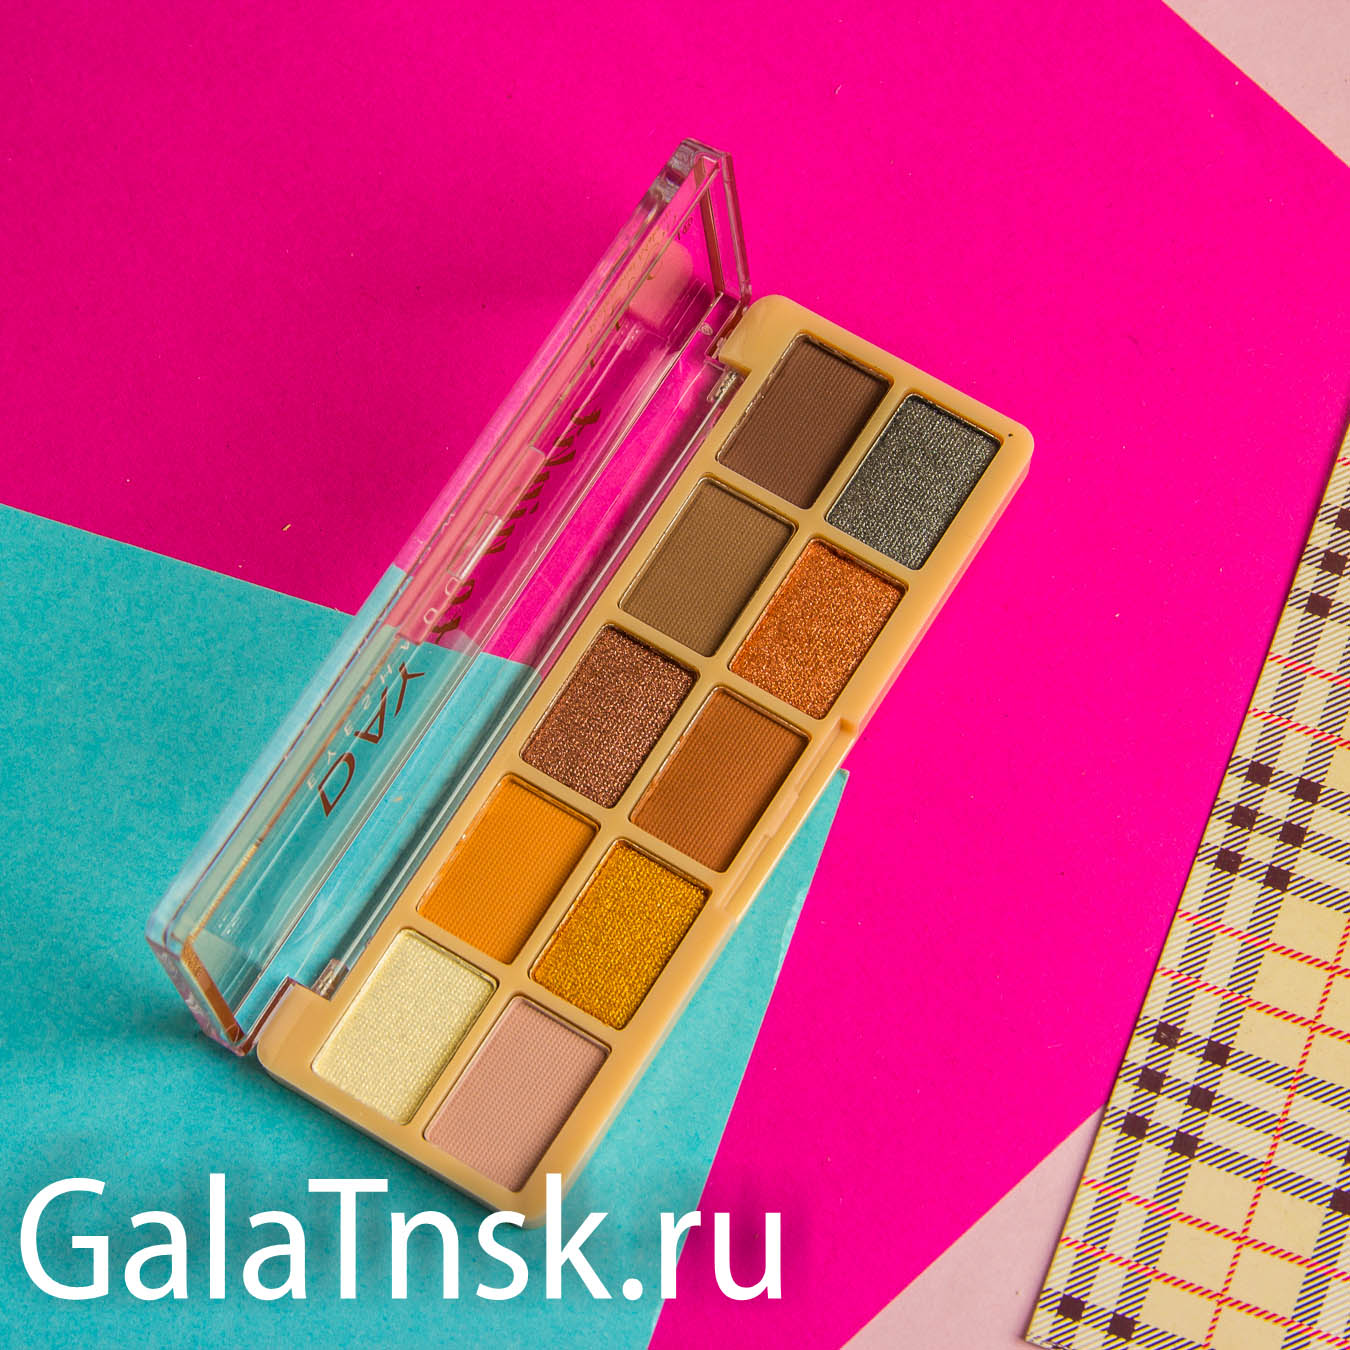 DO DO GIPL Тени DAY TO NIHT 10colors D3182 02